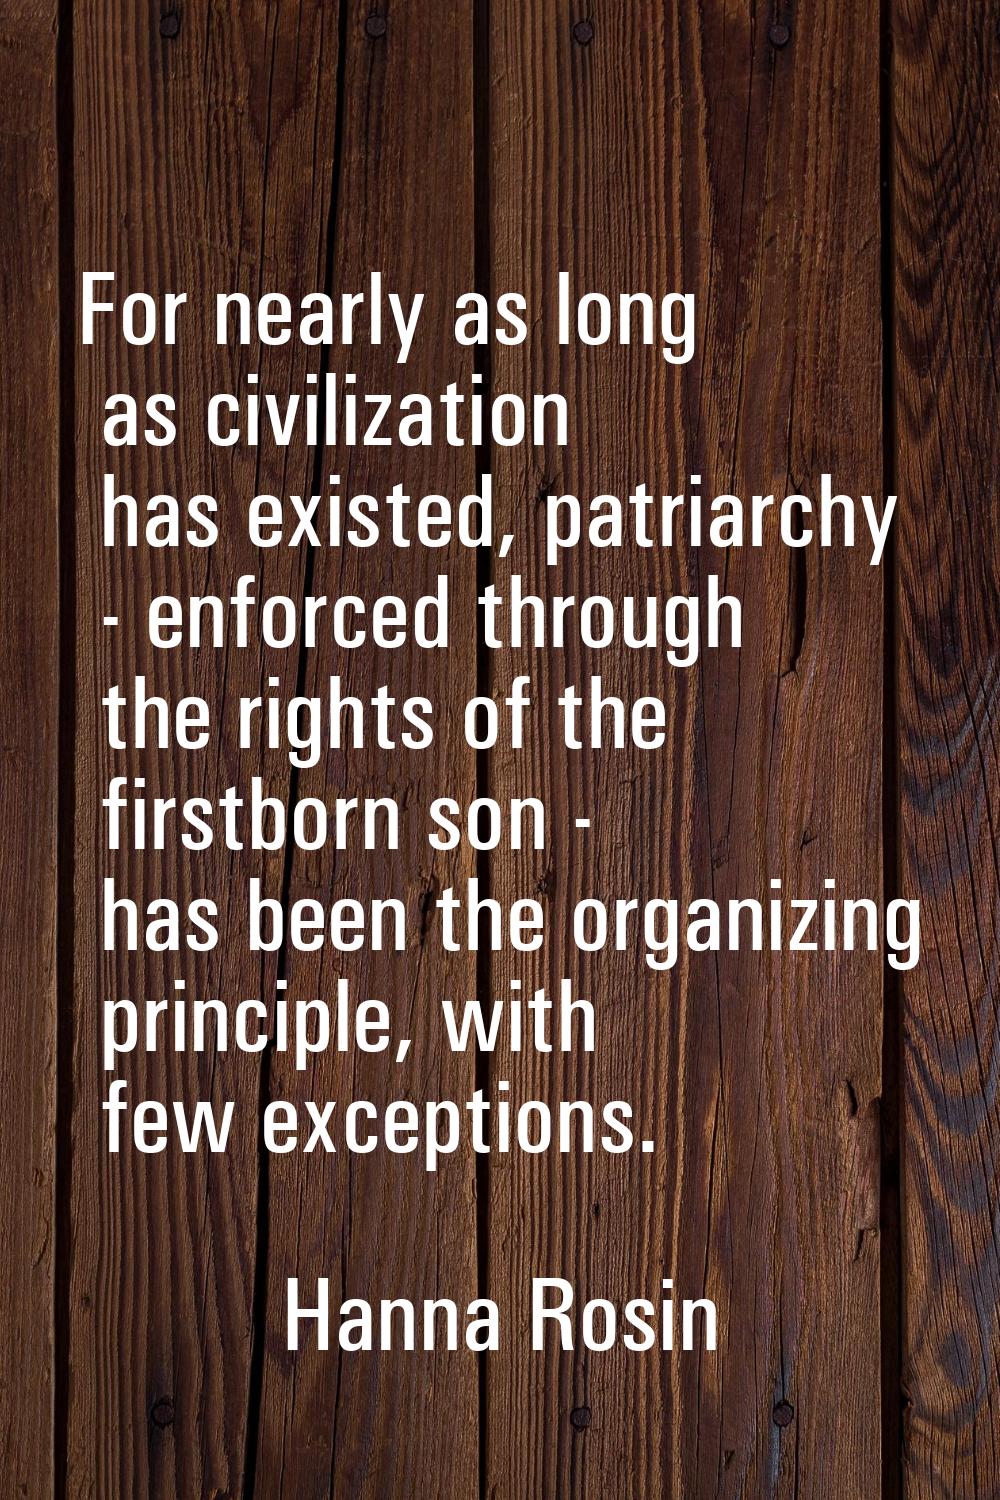 For nearly as long as civilization has existed, patriarchy - enforced through the rights of the fir